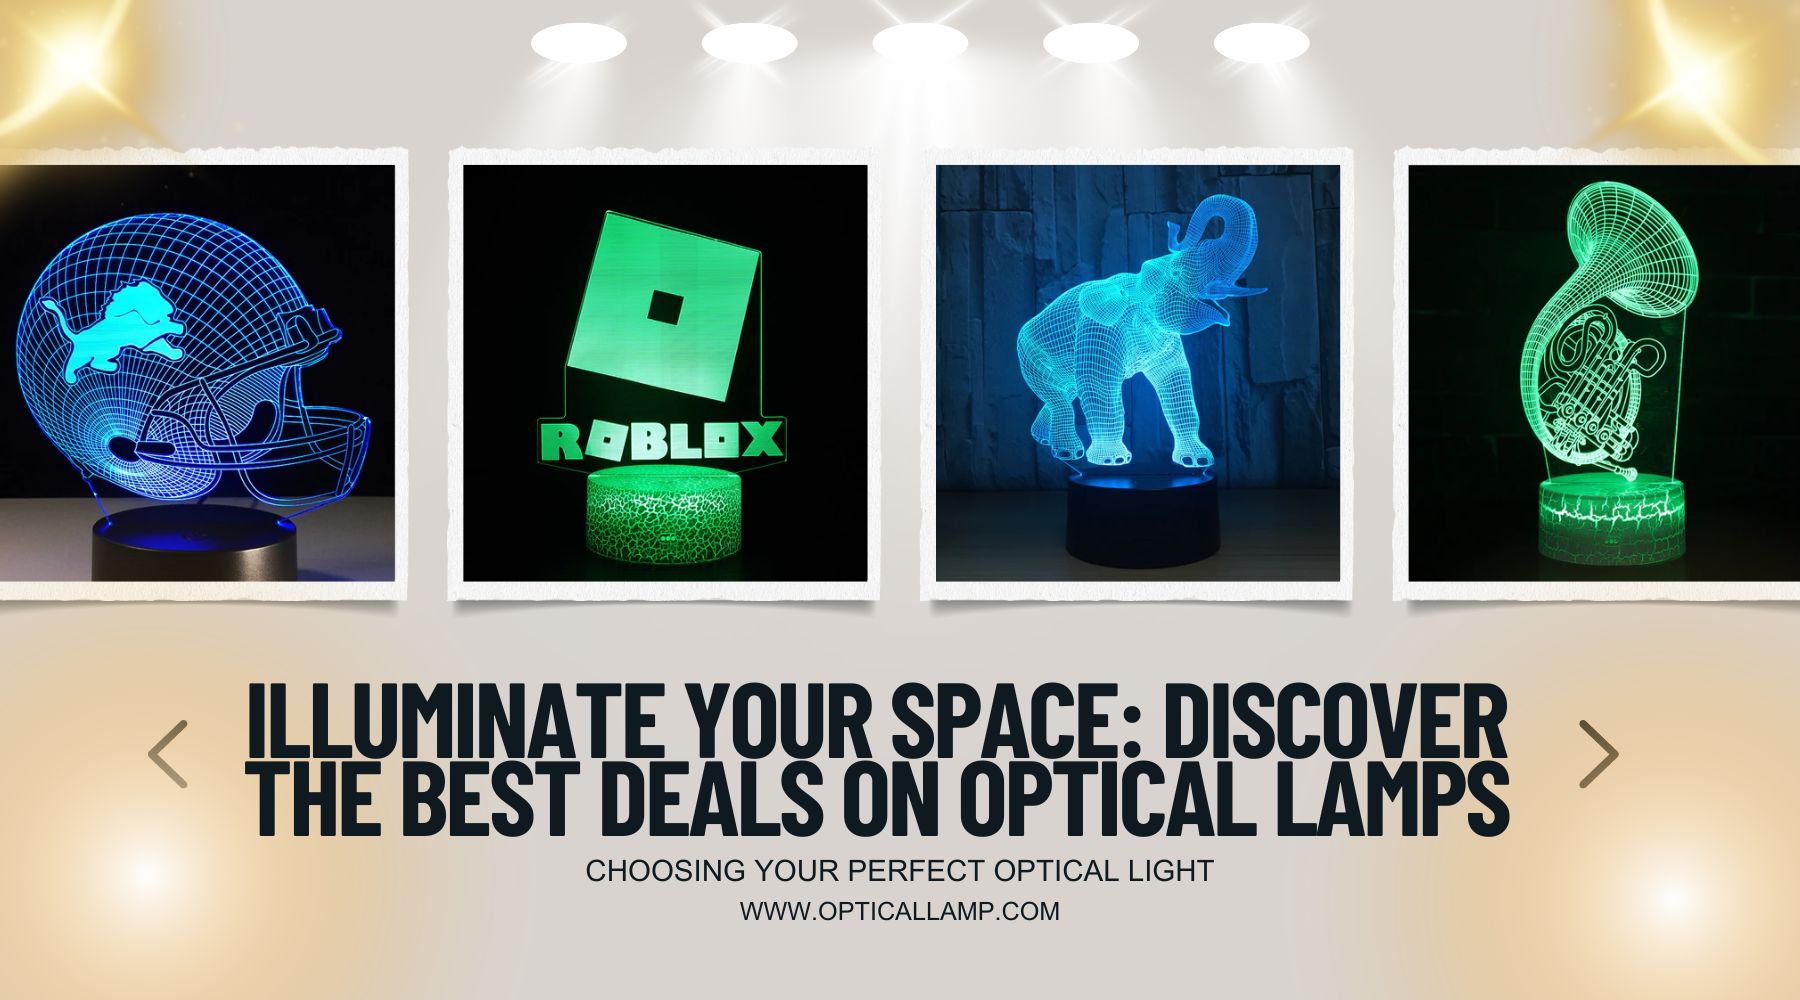 "Illuminate Your Space: Discover the Best Deals on Optical Lamps"